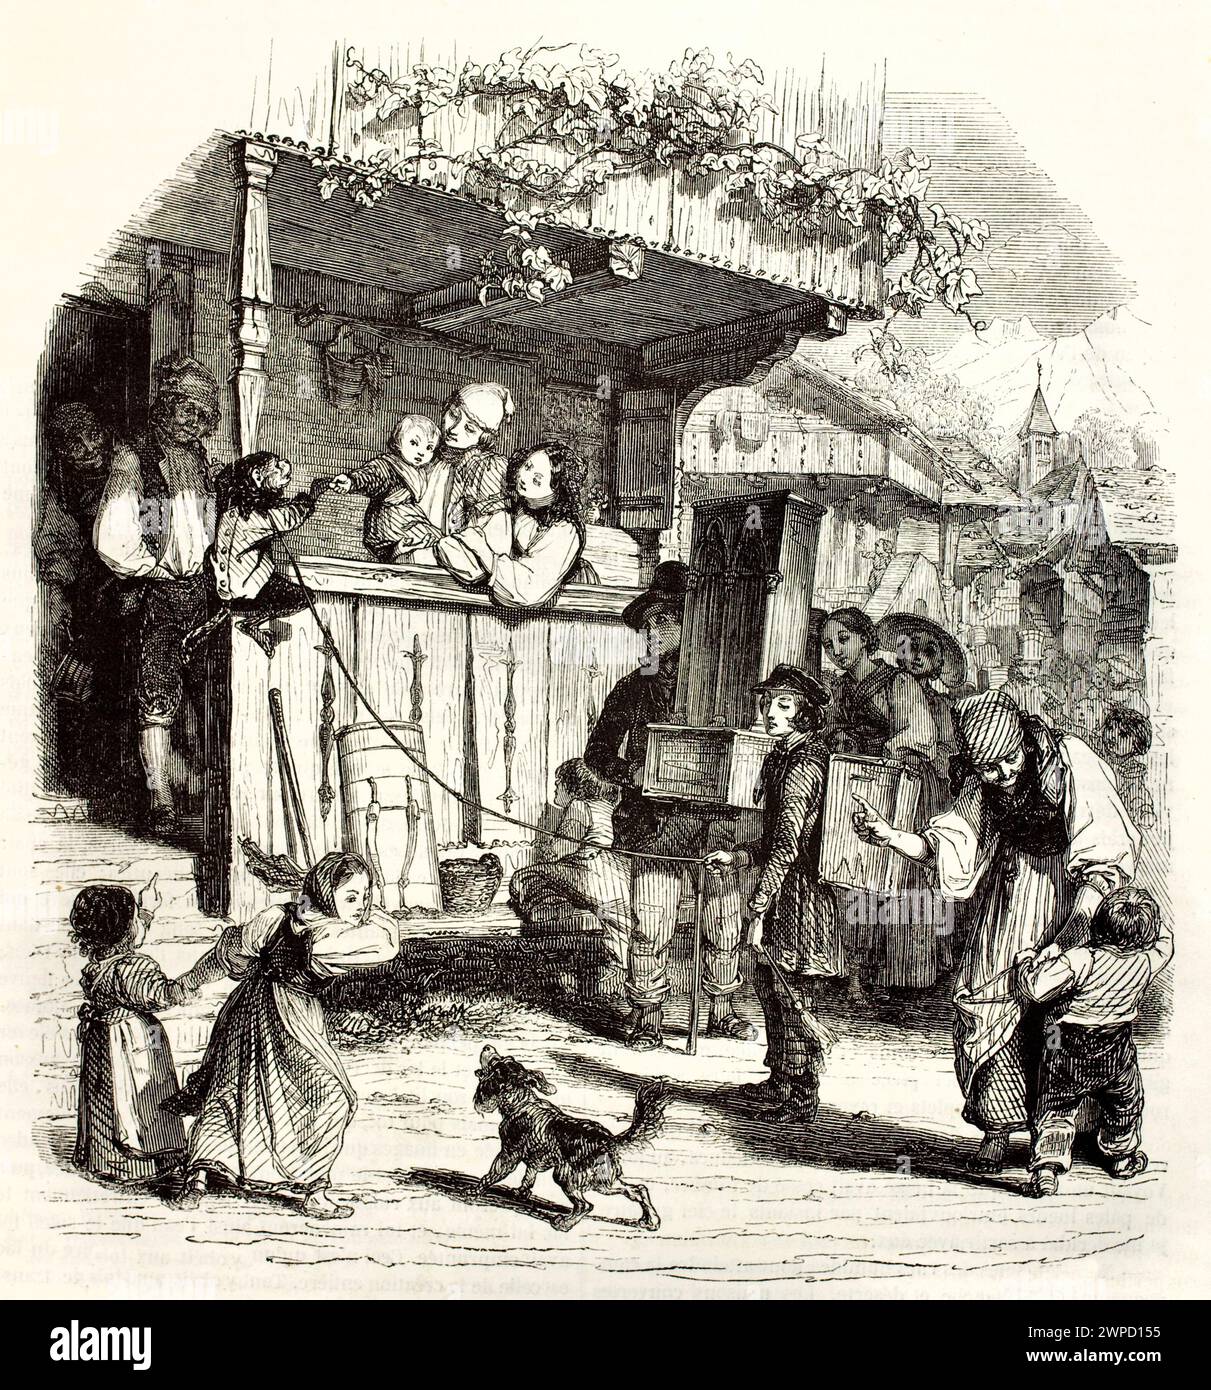 Old engraved illustration of a little monkey as children attraction in a village. By Girardet and Godard, published on Magasin Pittoresque, Paris, 185 Stock Photo